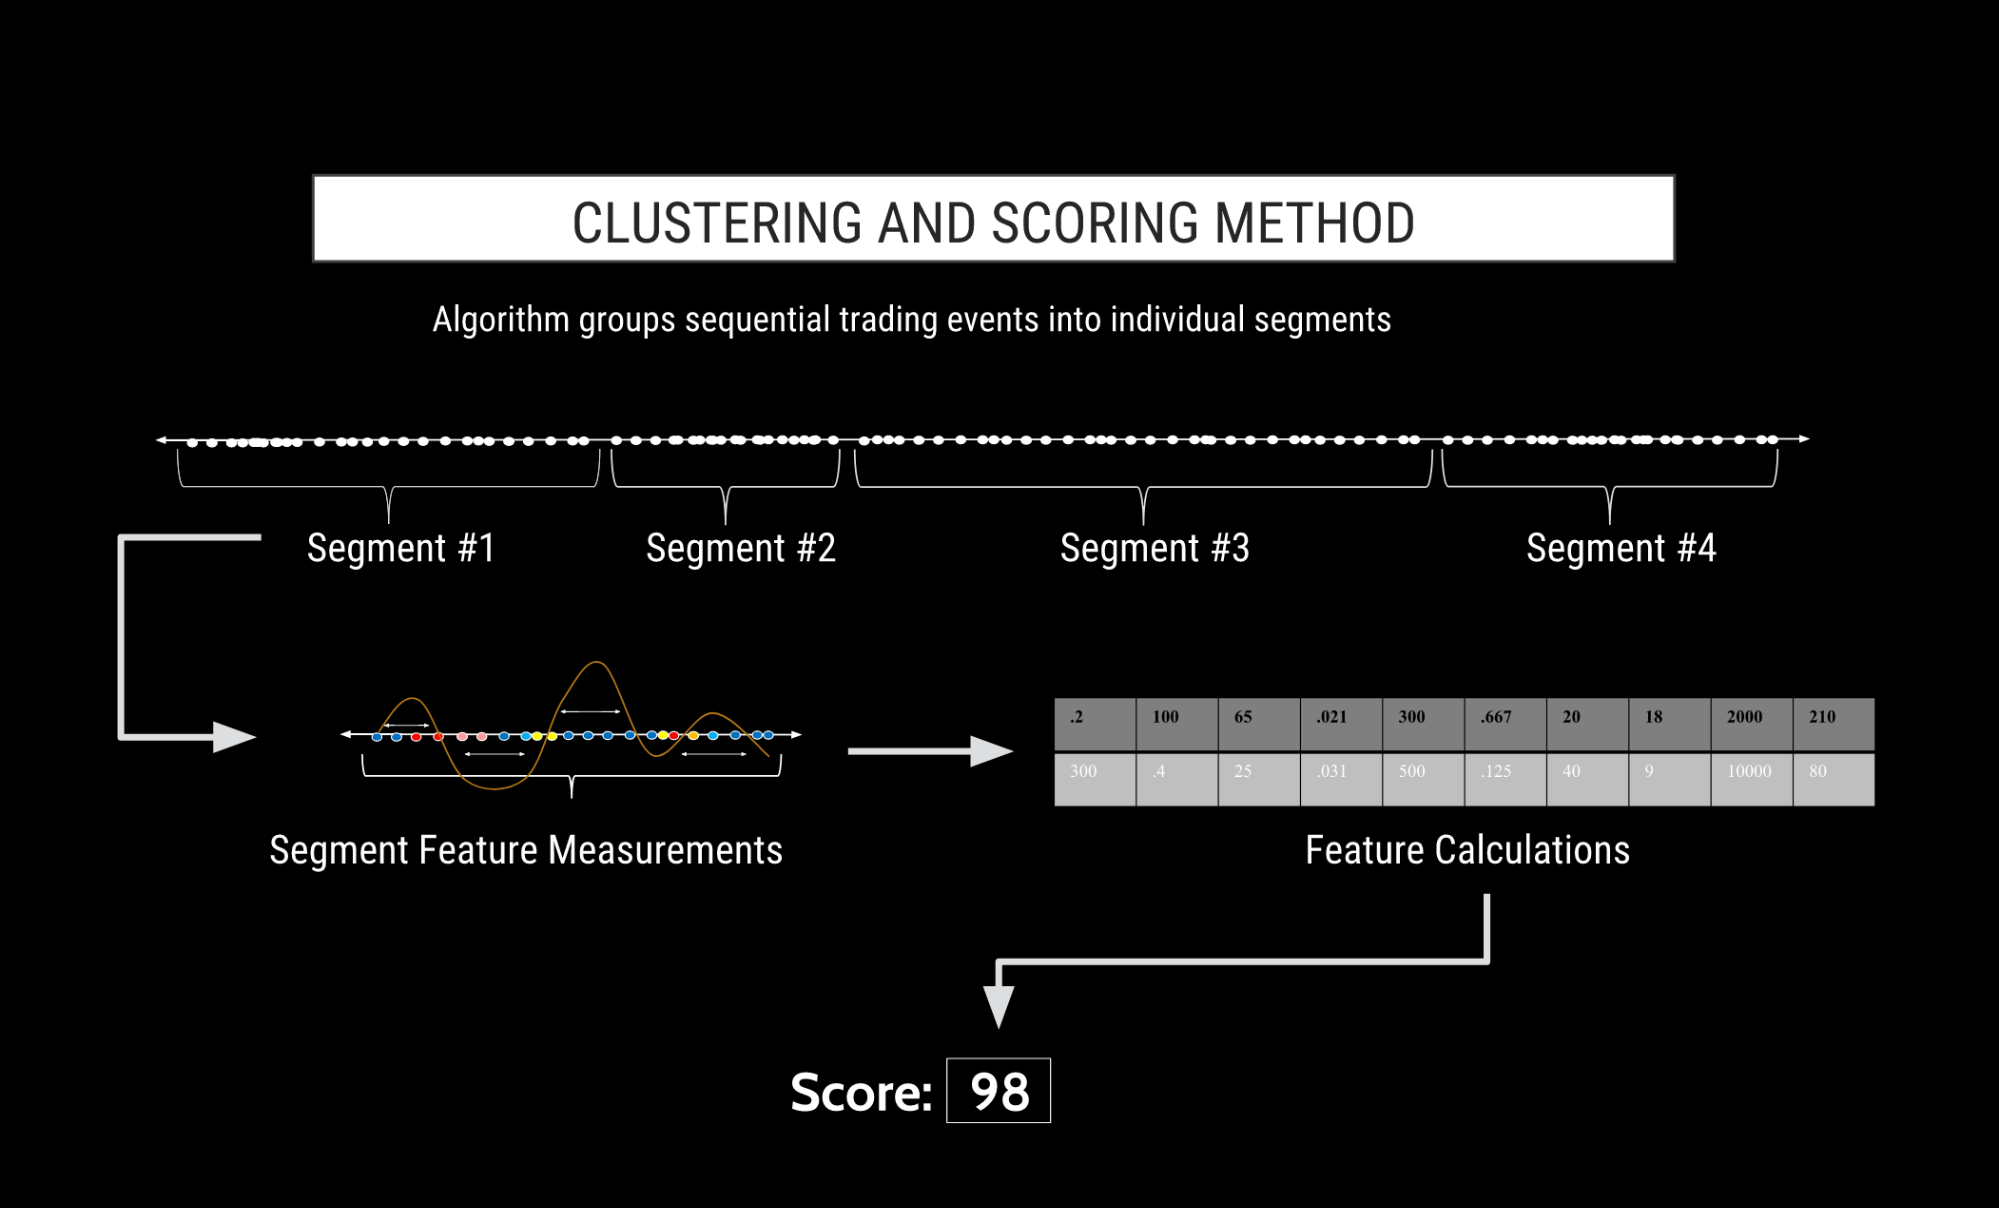 Clustering and Scoring Method